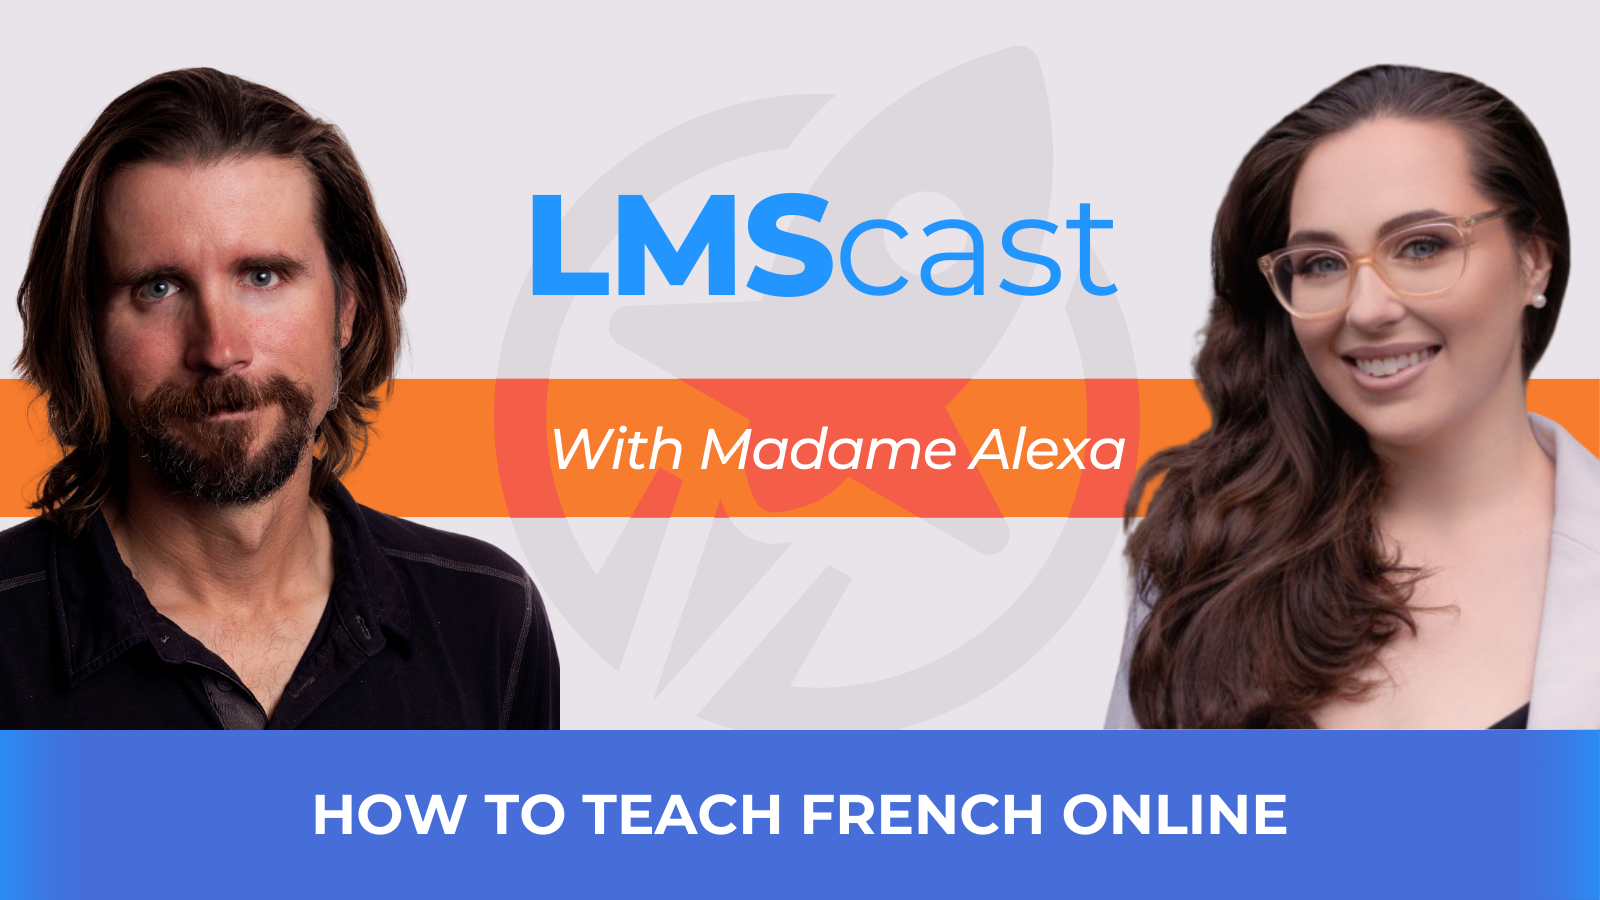 How to Teach French Online with Madame Alexa